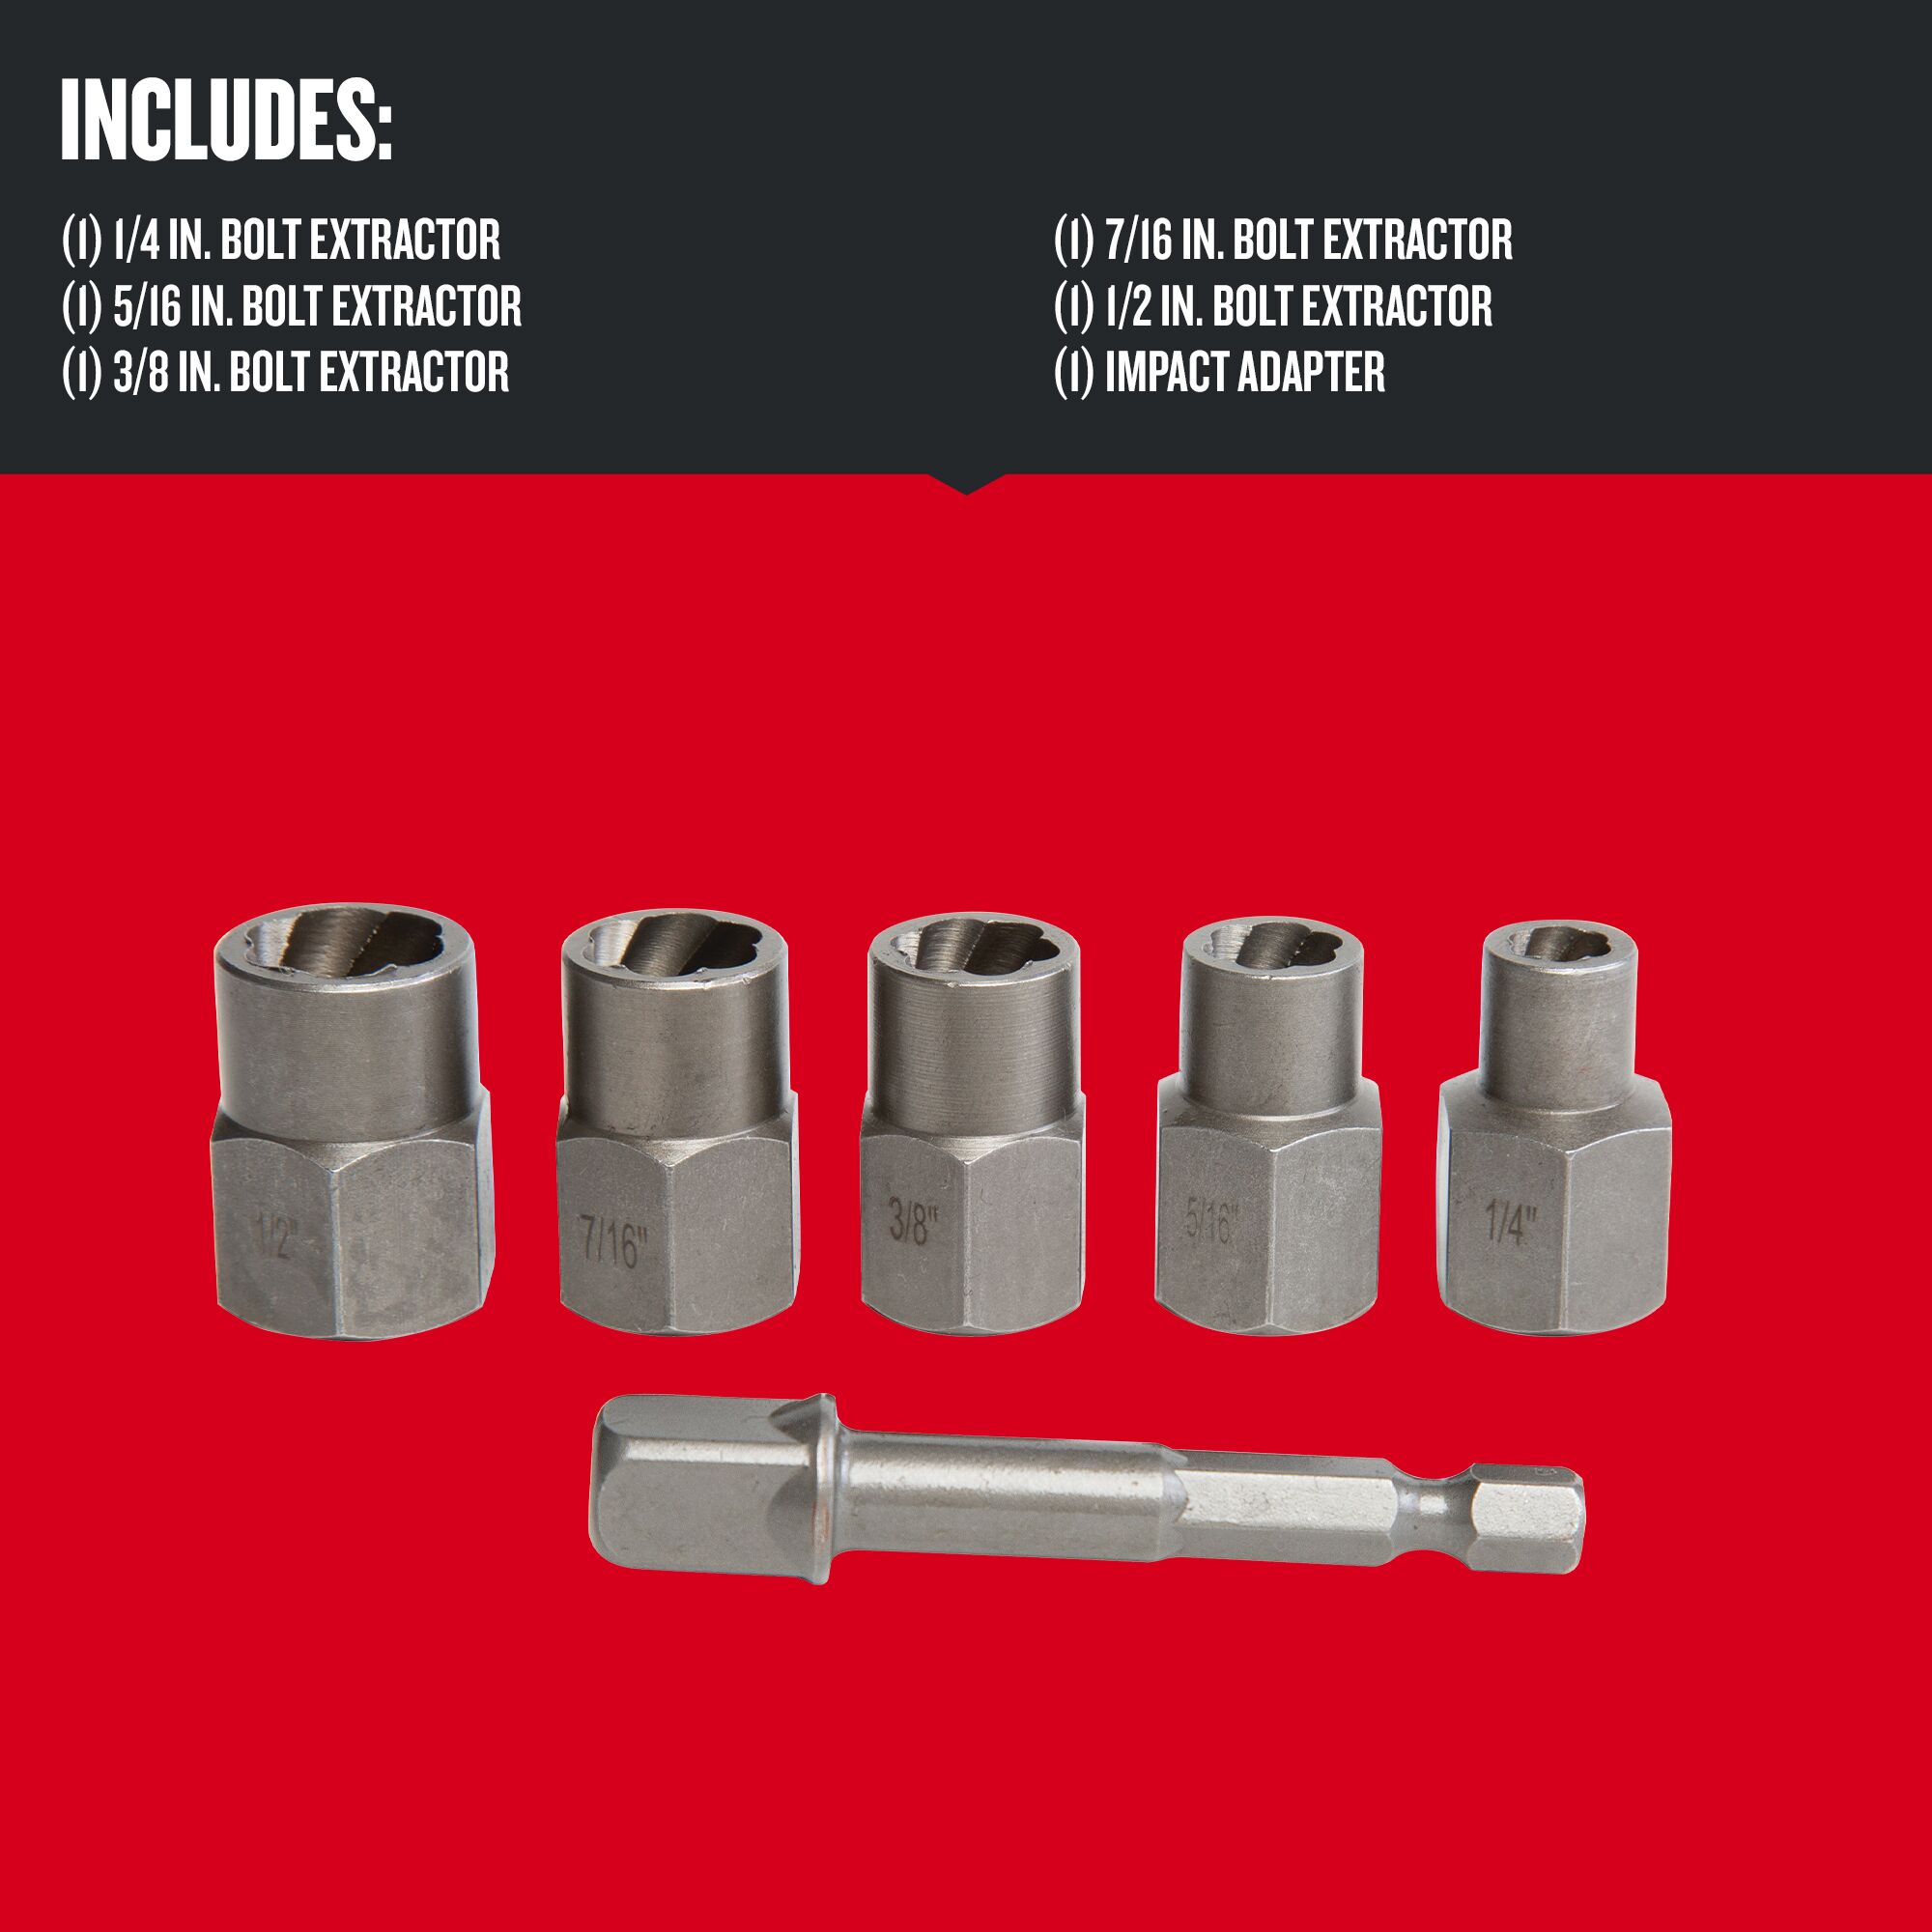 Graphic of CRAFTSMAN Fasteners: Extractors highlighting product features